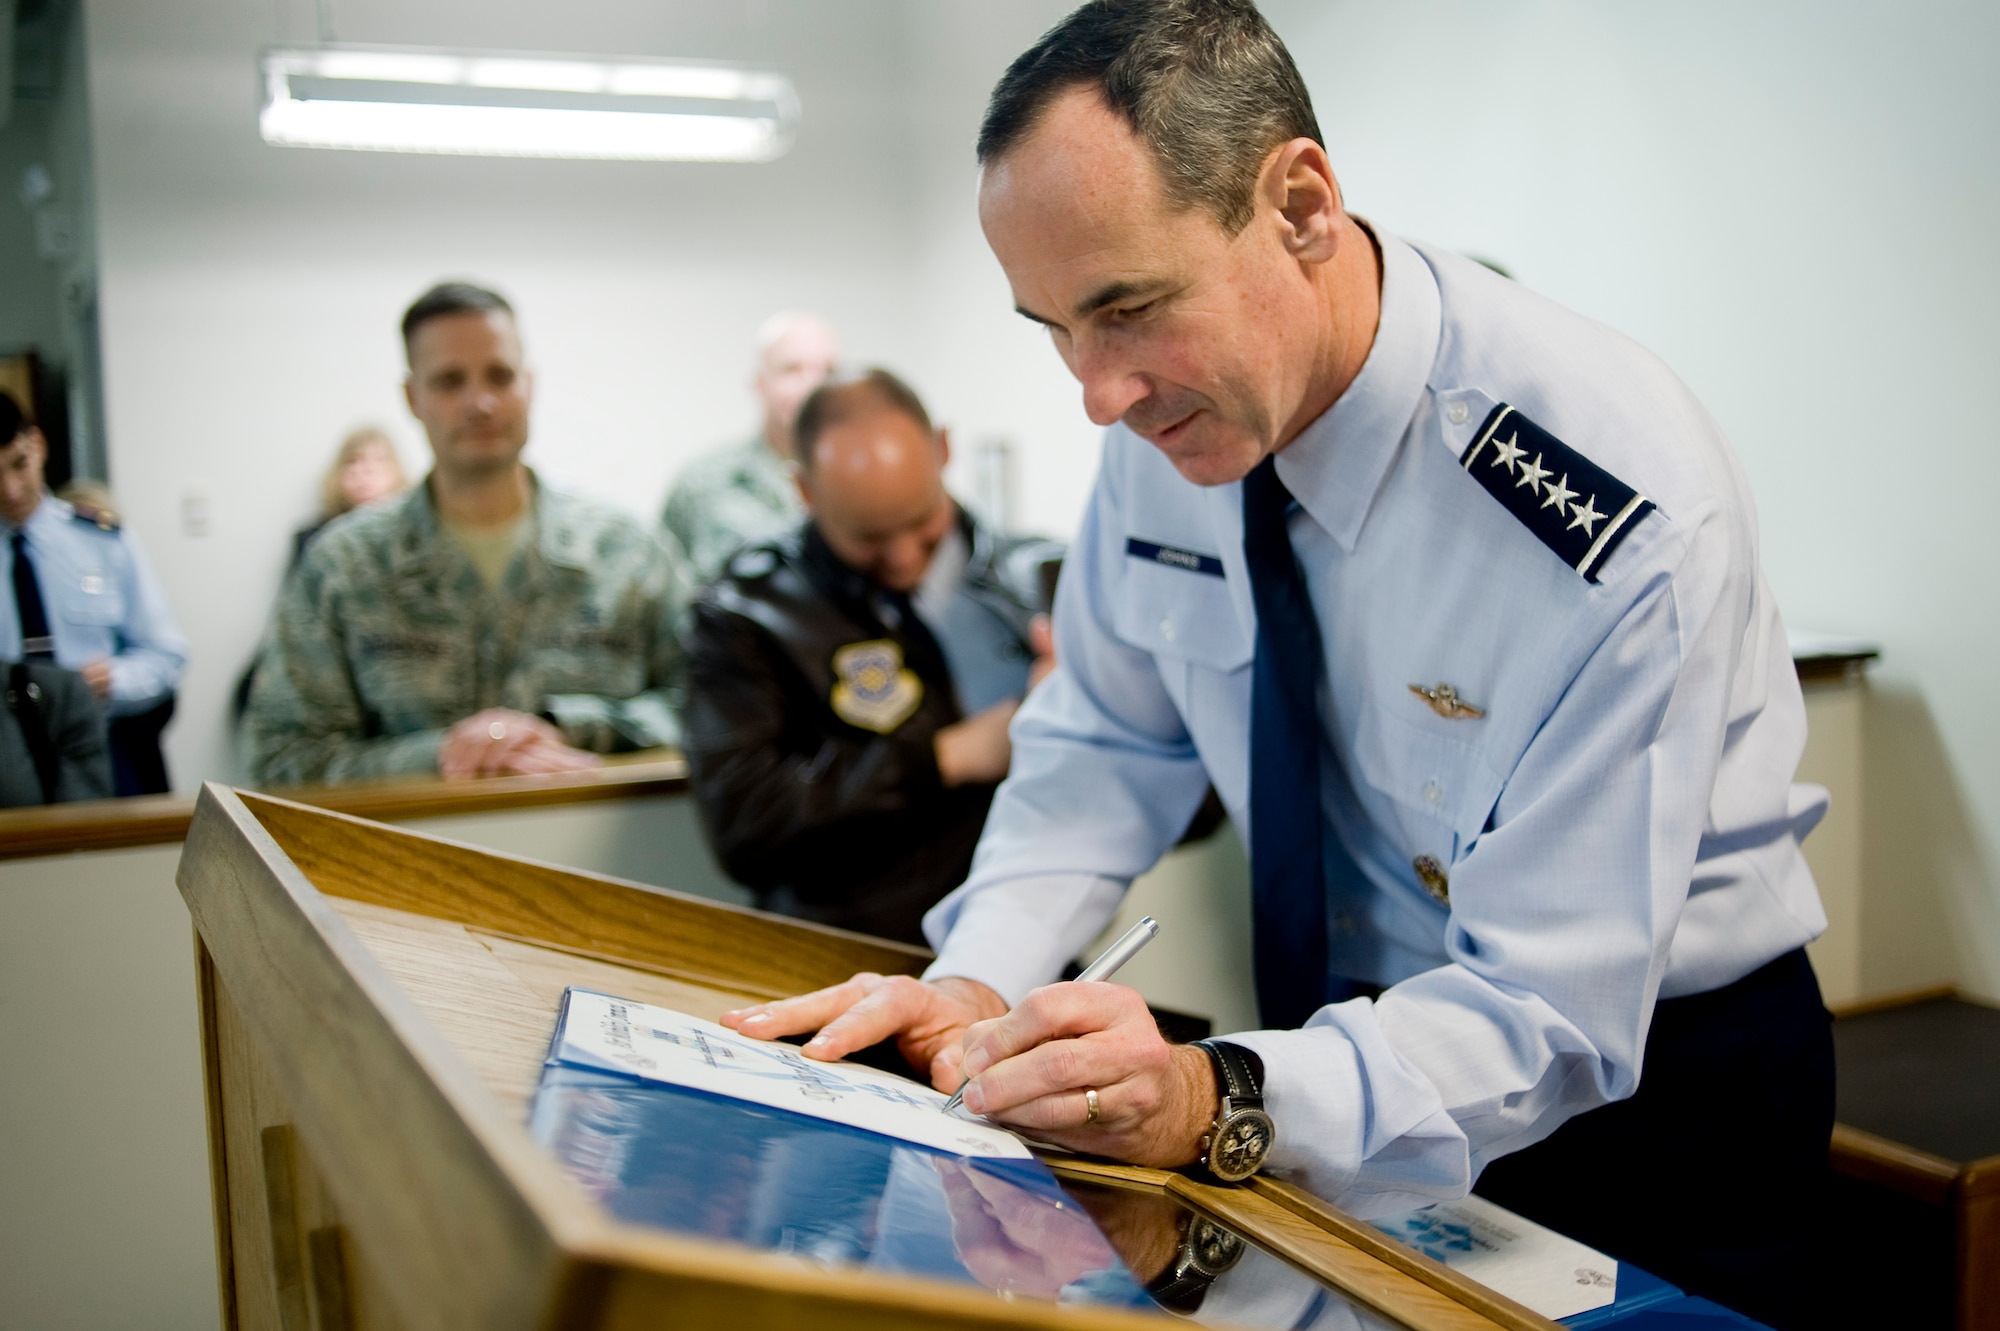 Gen. Raymond E. Johns, Jr., Air Mobility Command Commander, signs a certificate of award recognizing one of four AMC level Leo Marquez award winners during roll call at the 62nd Aircraft Maintenance Squadron, Silver AMU Monday. Gen. Johns presented Leo Marquez Award certificates, spoke to annual award winners from the 62nd AMXS and MXS squadrons, and encouraged maintainers to perform well during the upcoming LCAP inspections. (U.S. Air Force Photo/Abner Guzman)